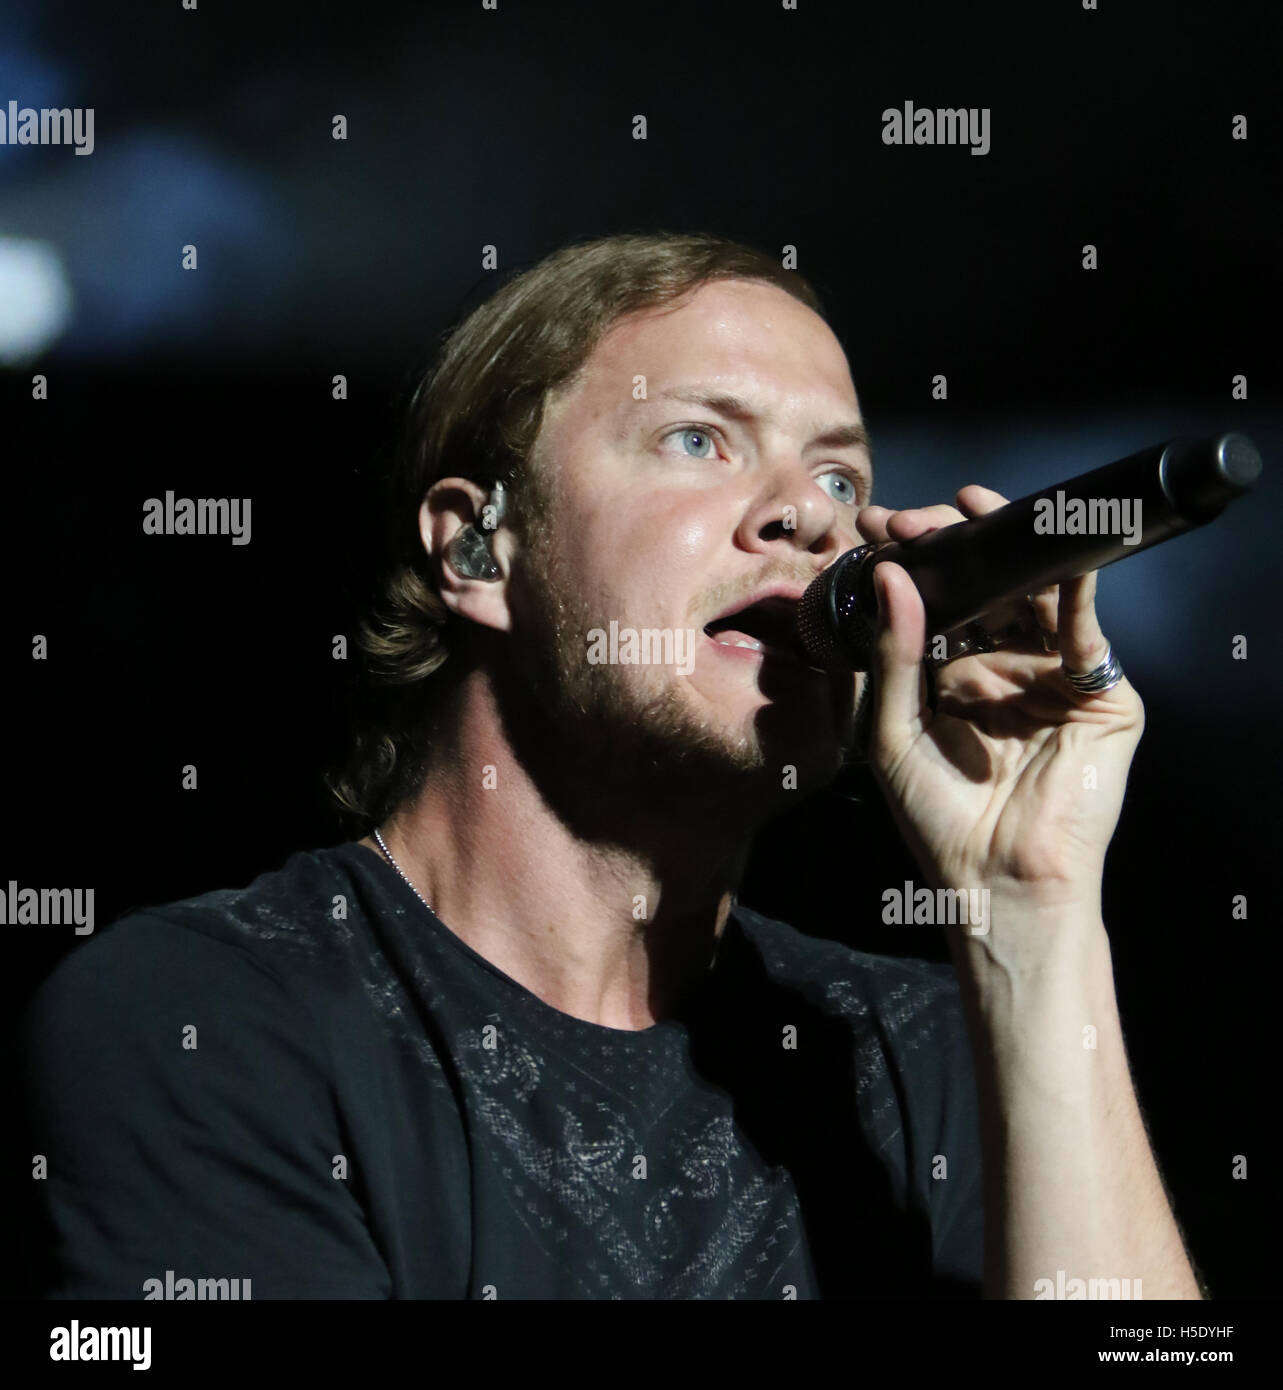 Singer Dan Reynolds of Imagine Dragons performs at Life is Beautiful Music Festival Day 2 on September 26th, 2015 in Las Vegas, Nevada. Stock Photo